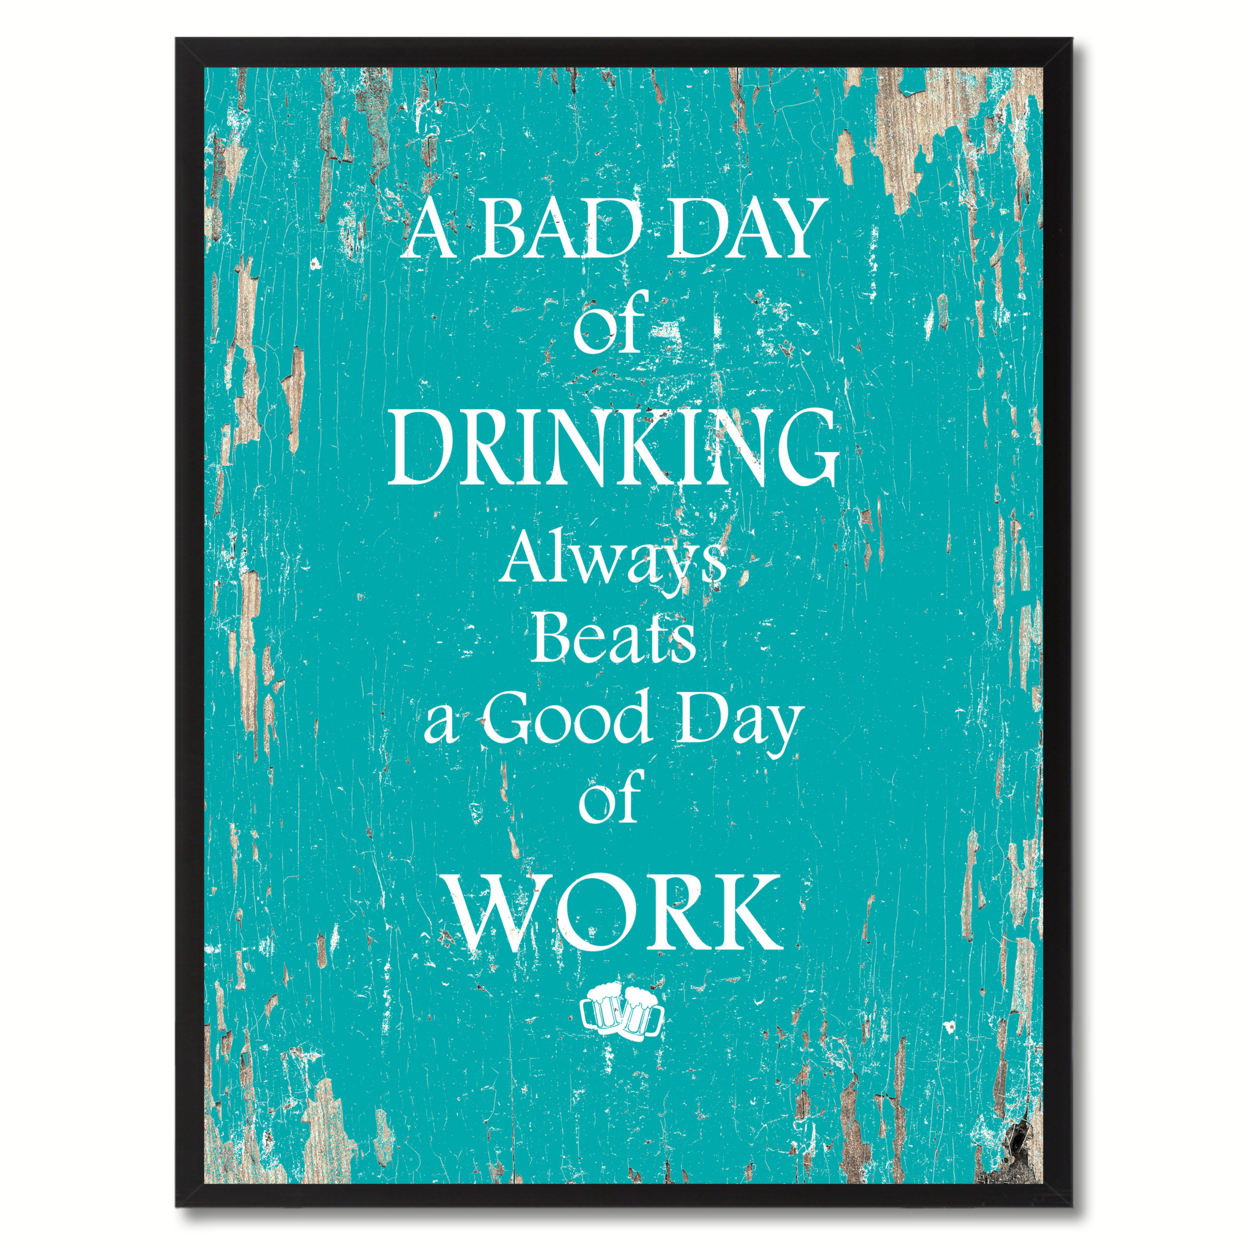 A Bad Day Of Drinking Always Beats A Good Day Of Work Saying Canvas Print with Picture Frame Home Decor Wall Art Gifts - 28"x37"